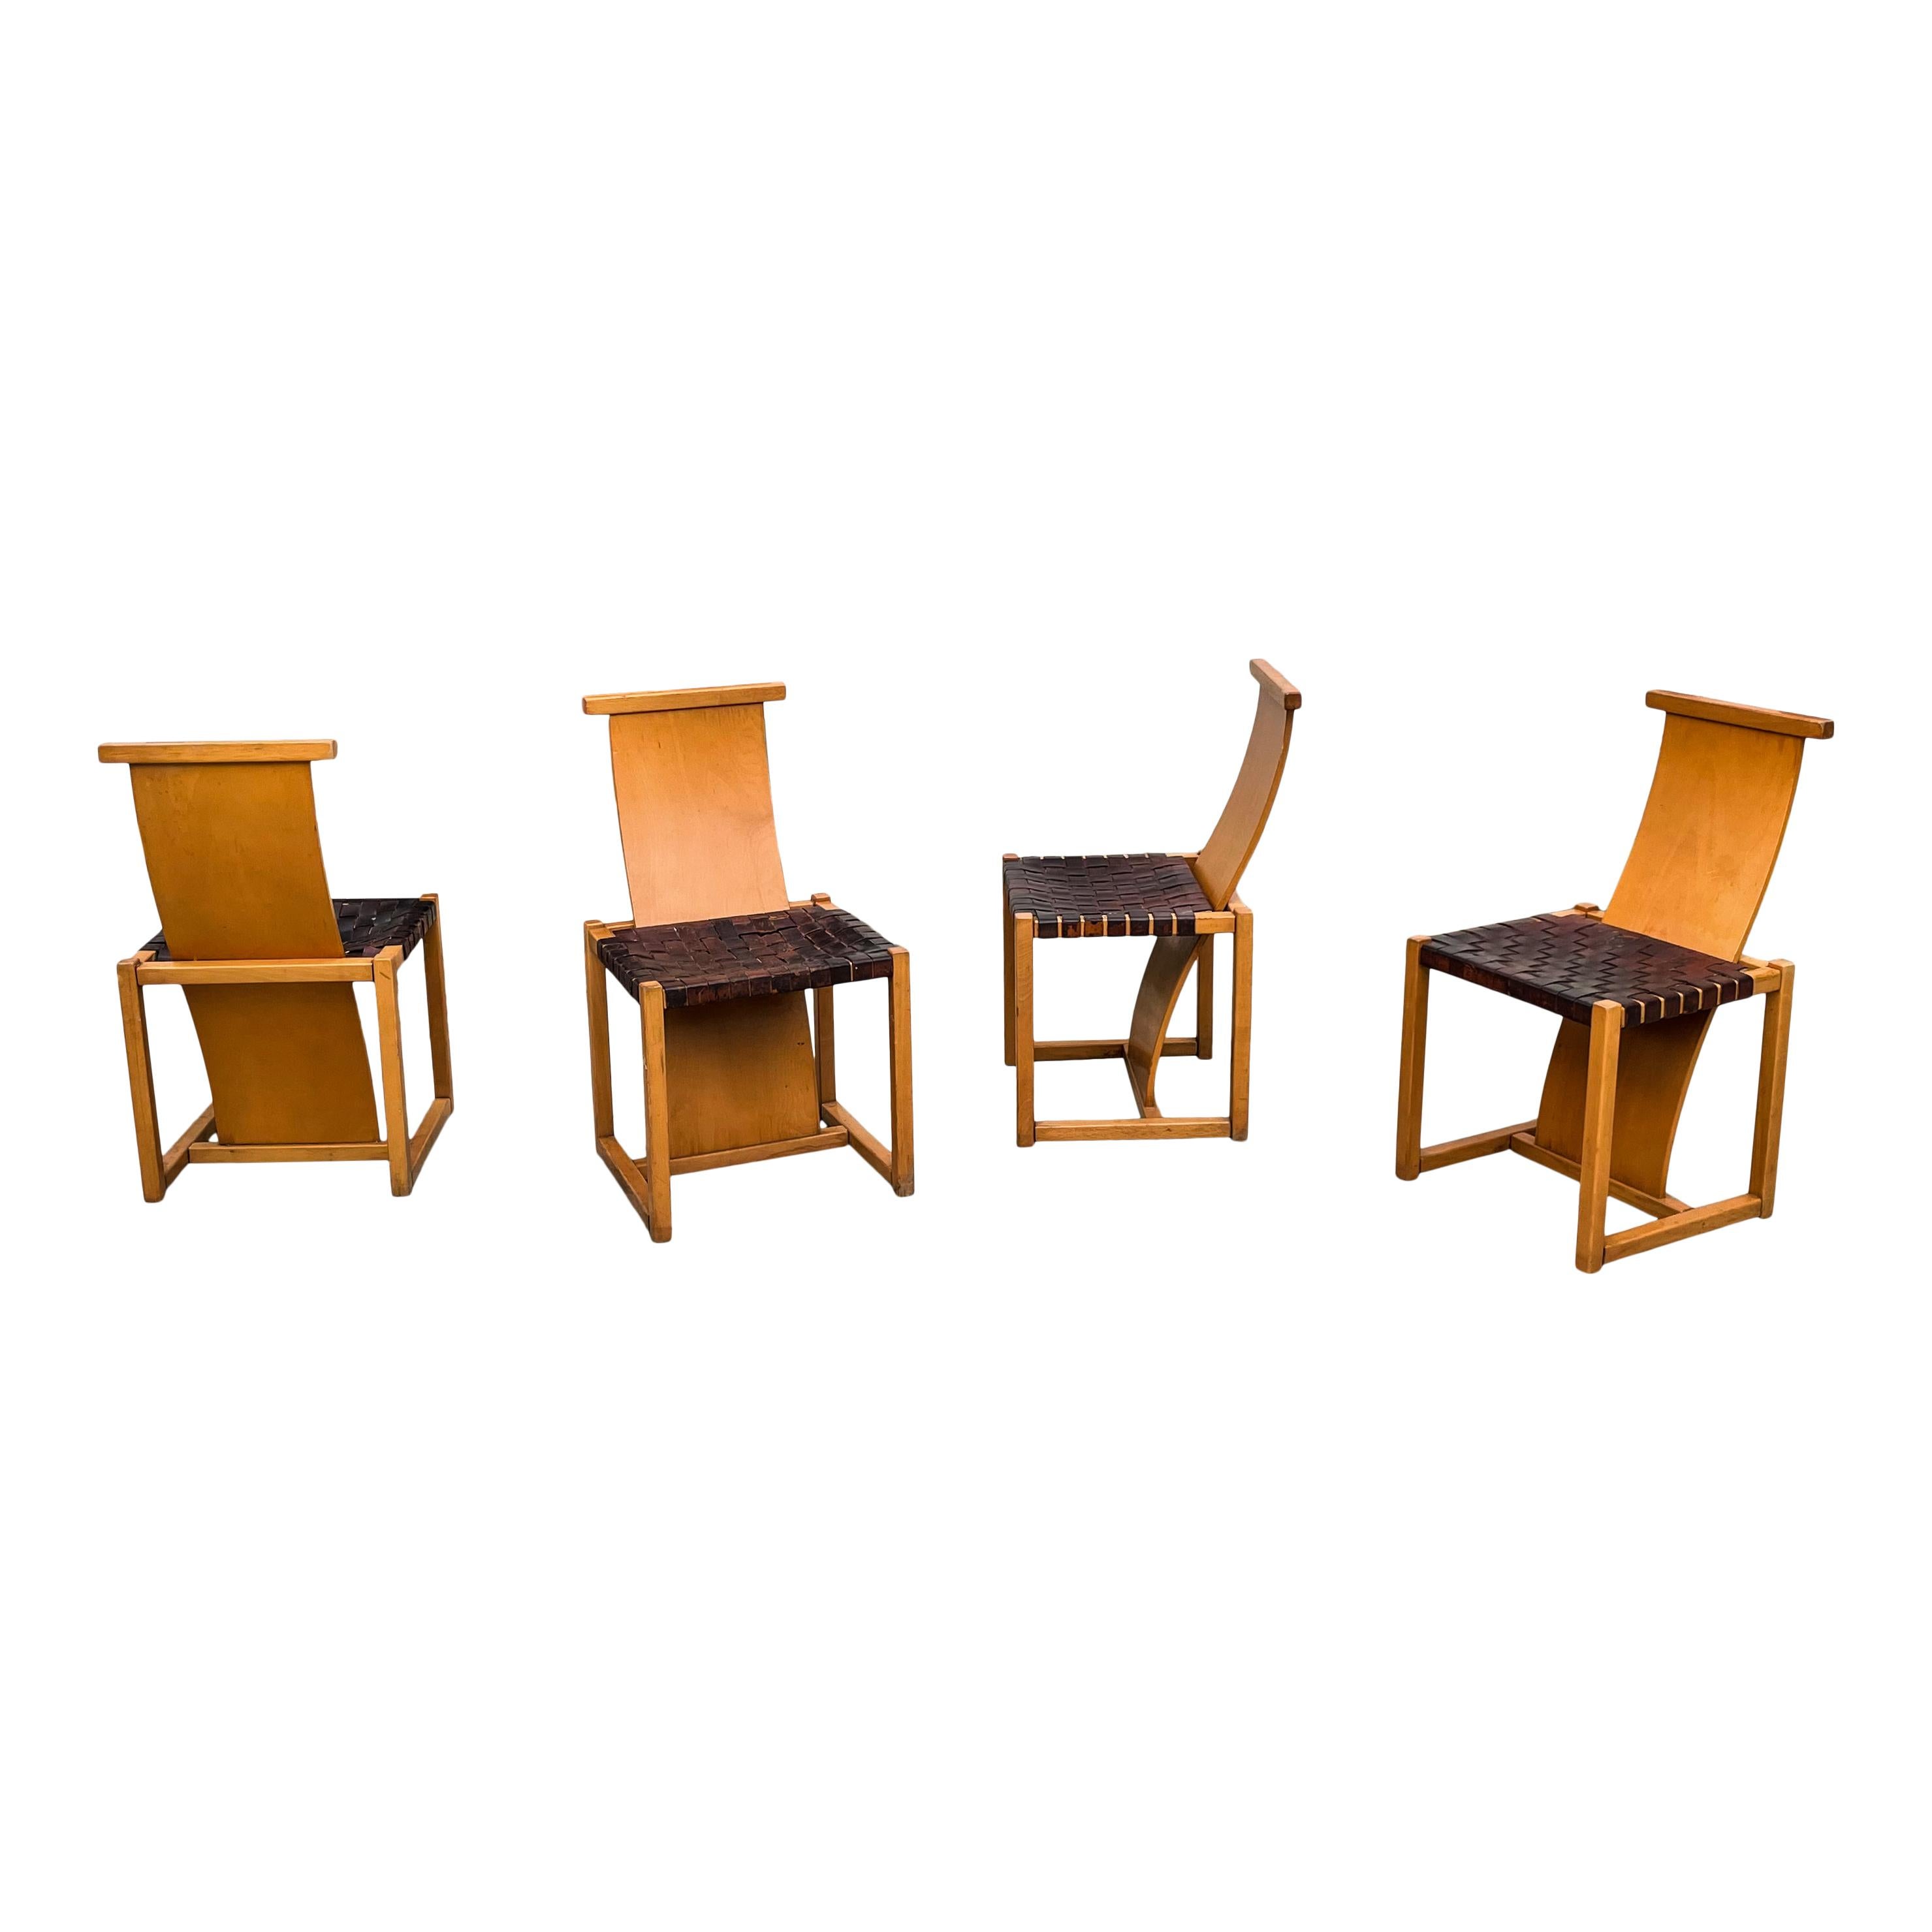 Set of four Italian dining chairs, made in the 70s.
They feature a beech wood structure and a brown woven leather seat.
The s-shaped backrest, linked with the squared legs, is the main feature of the chairs.
The shape and the woven leather remind